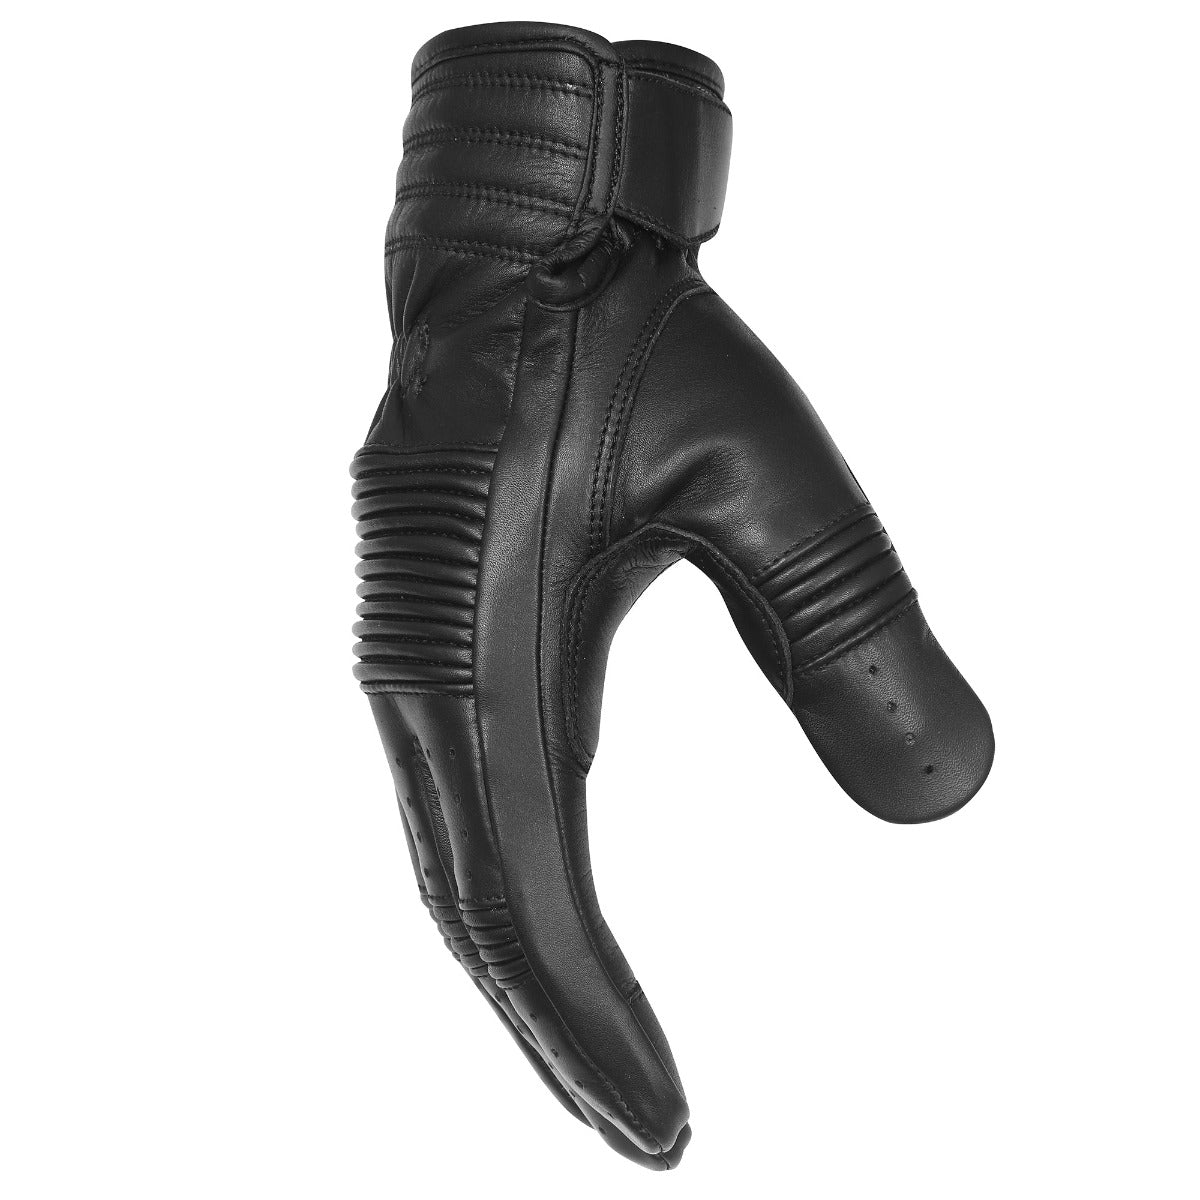 Vance Leather Men's Premium Mid-Length Leather Motorcycle Gloves